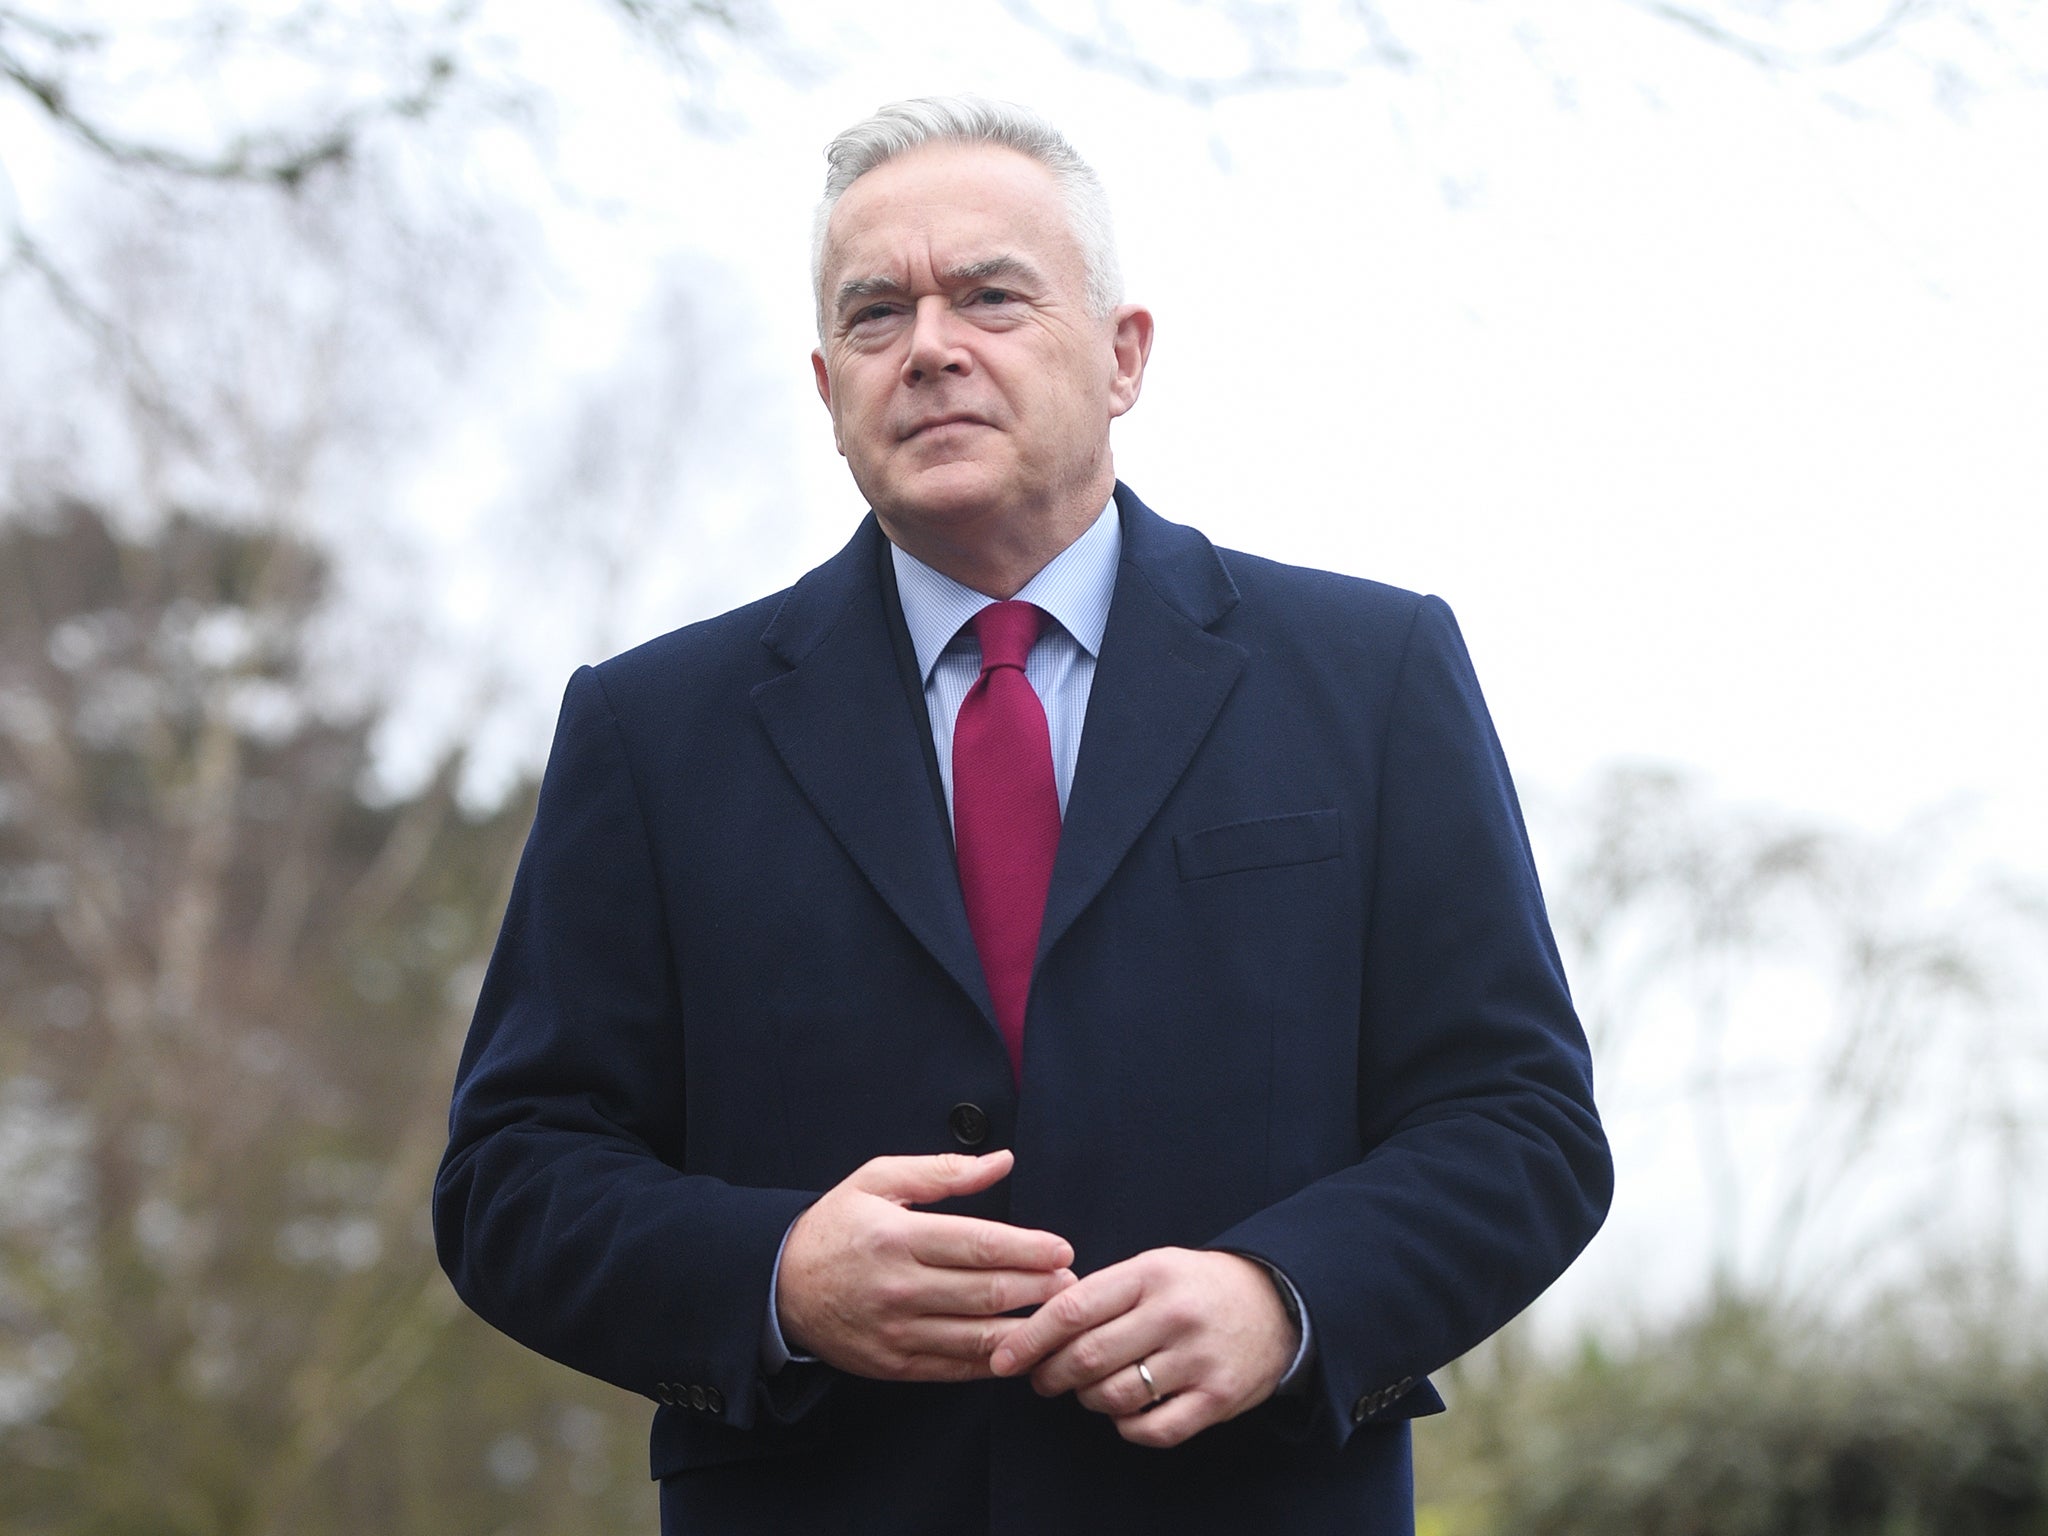 Huw Edwards BBC presenter who broke Queens death now at centre of sex scandal The Independent pic